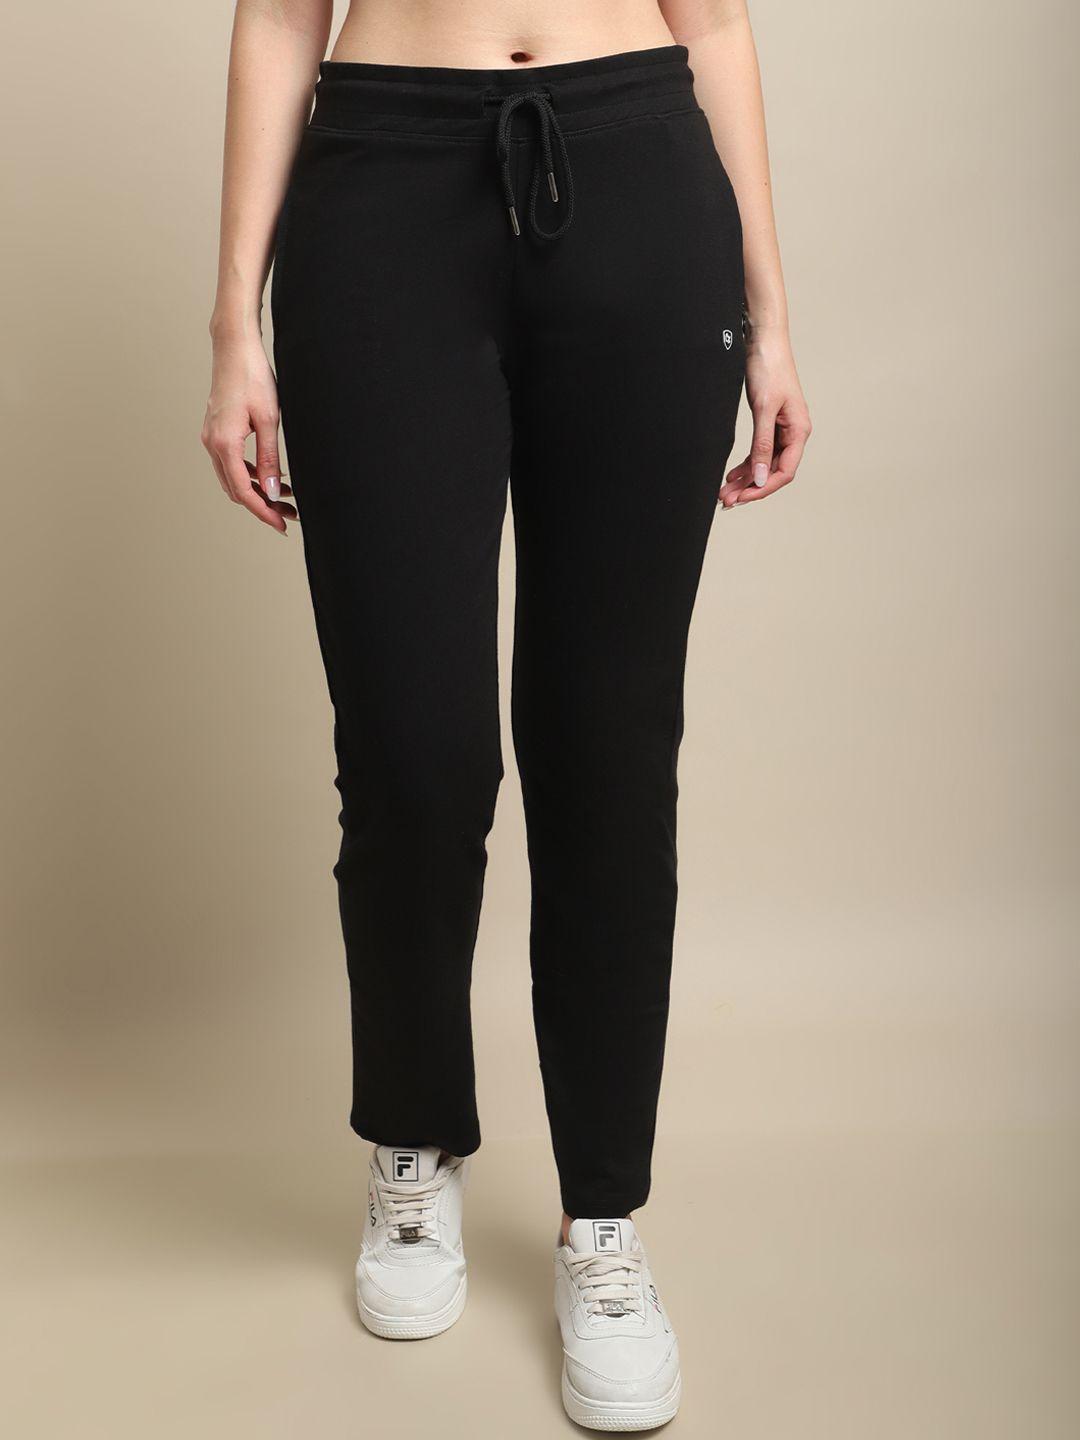 cantabil-women-mid-rise-cotton-track-pants